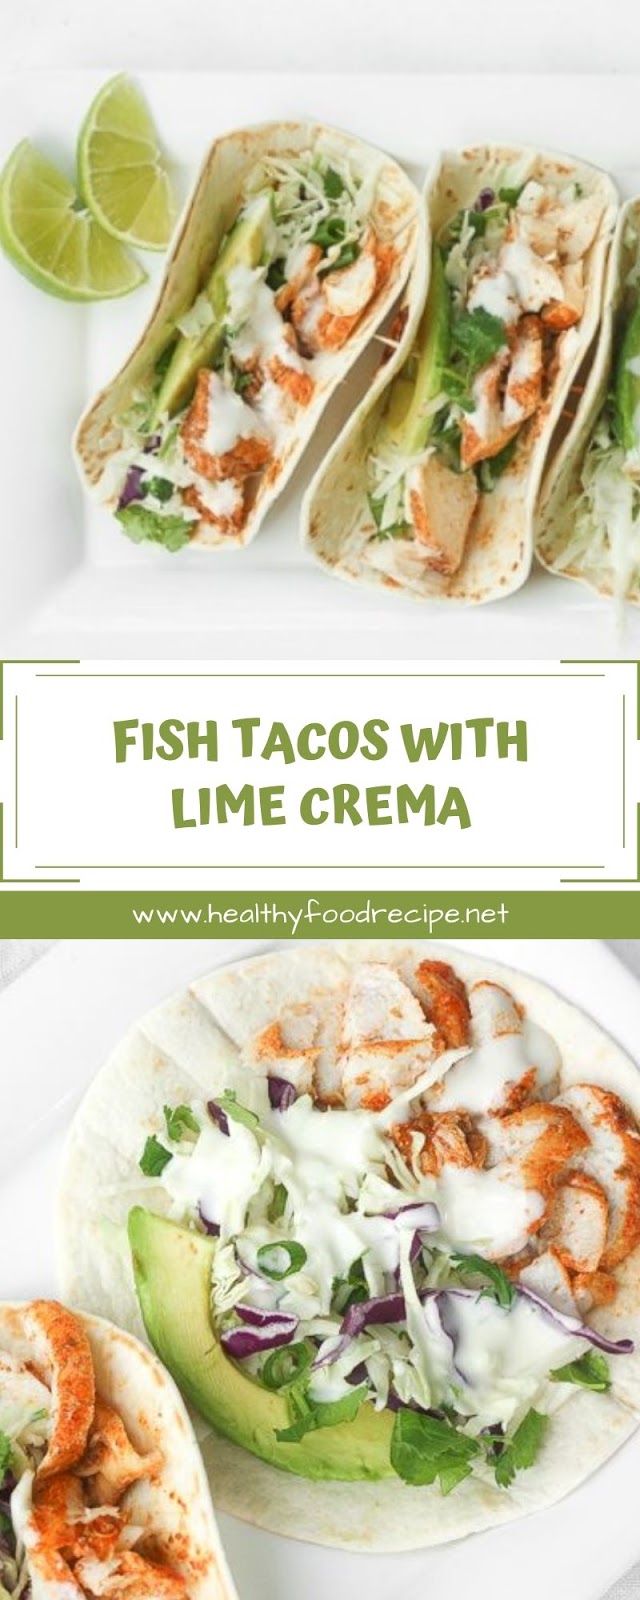 FISH TACOS WITH LIME CREMA